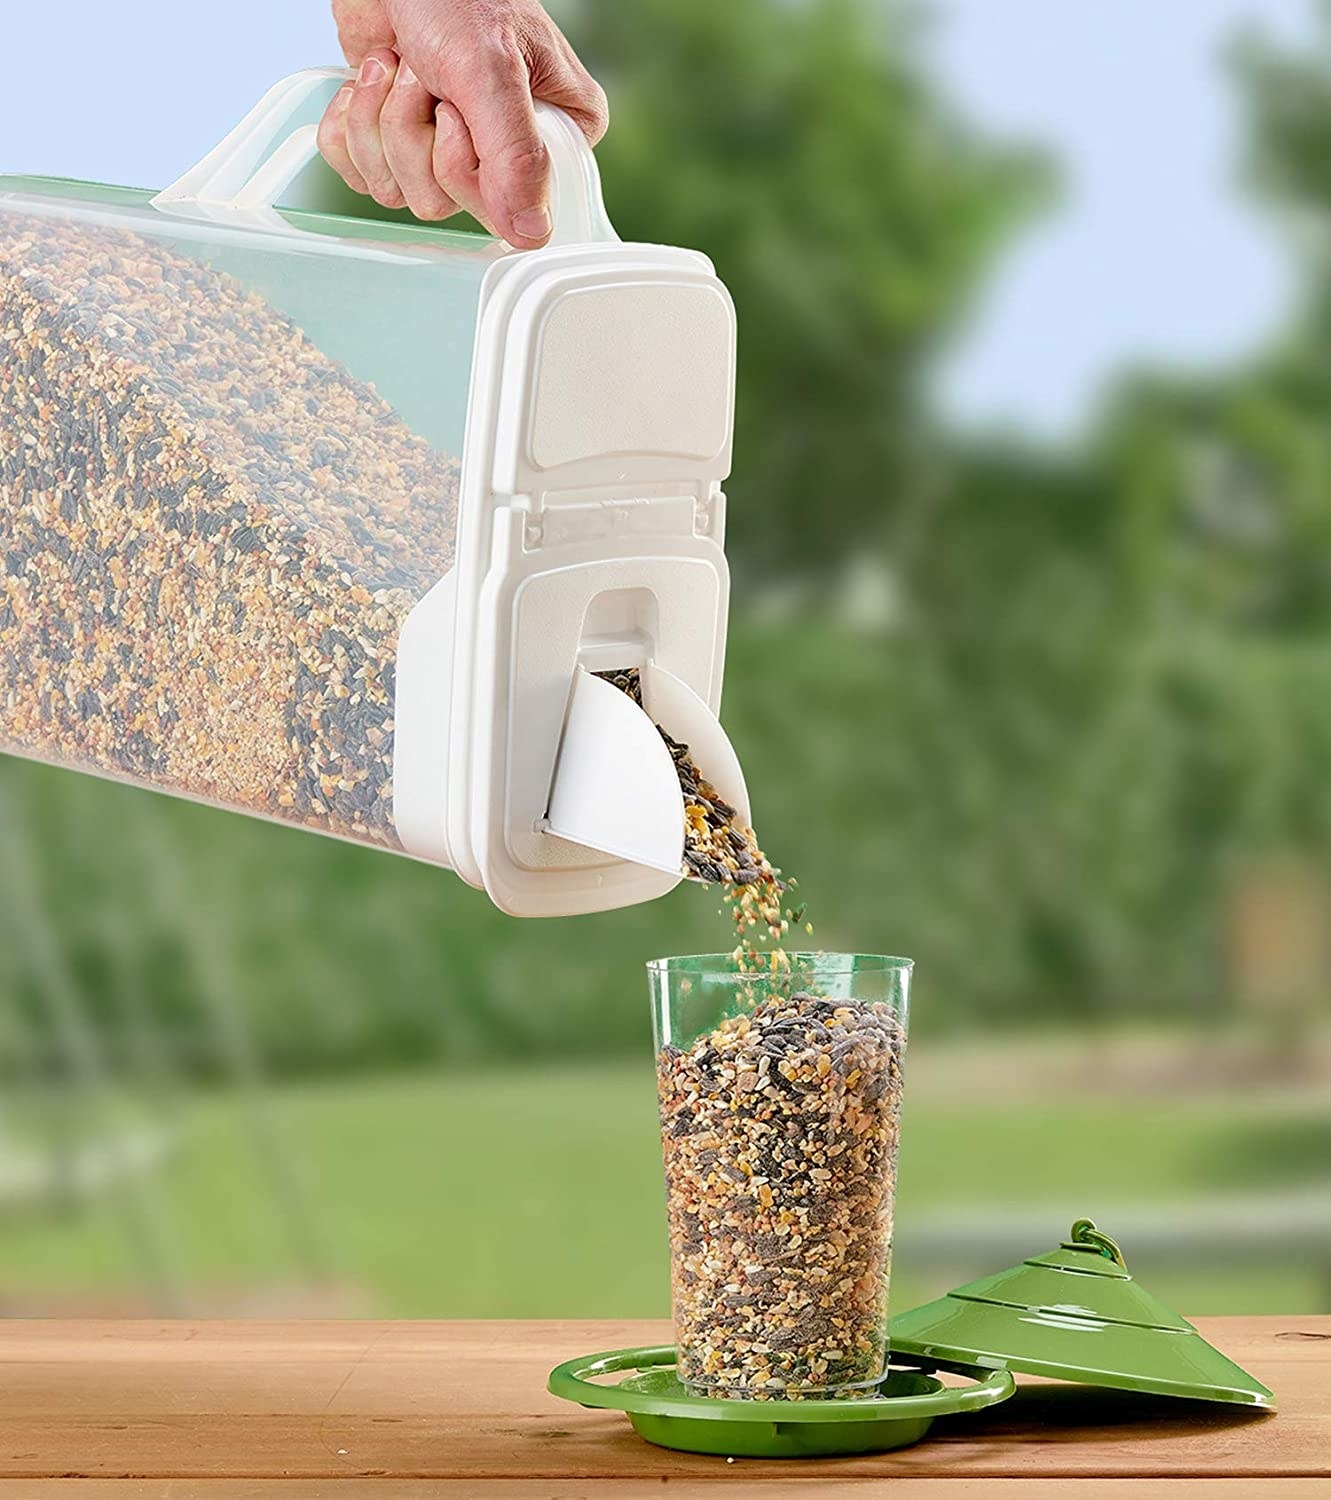 A person using the pet food bin to pour bird seed into a glass